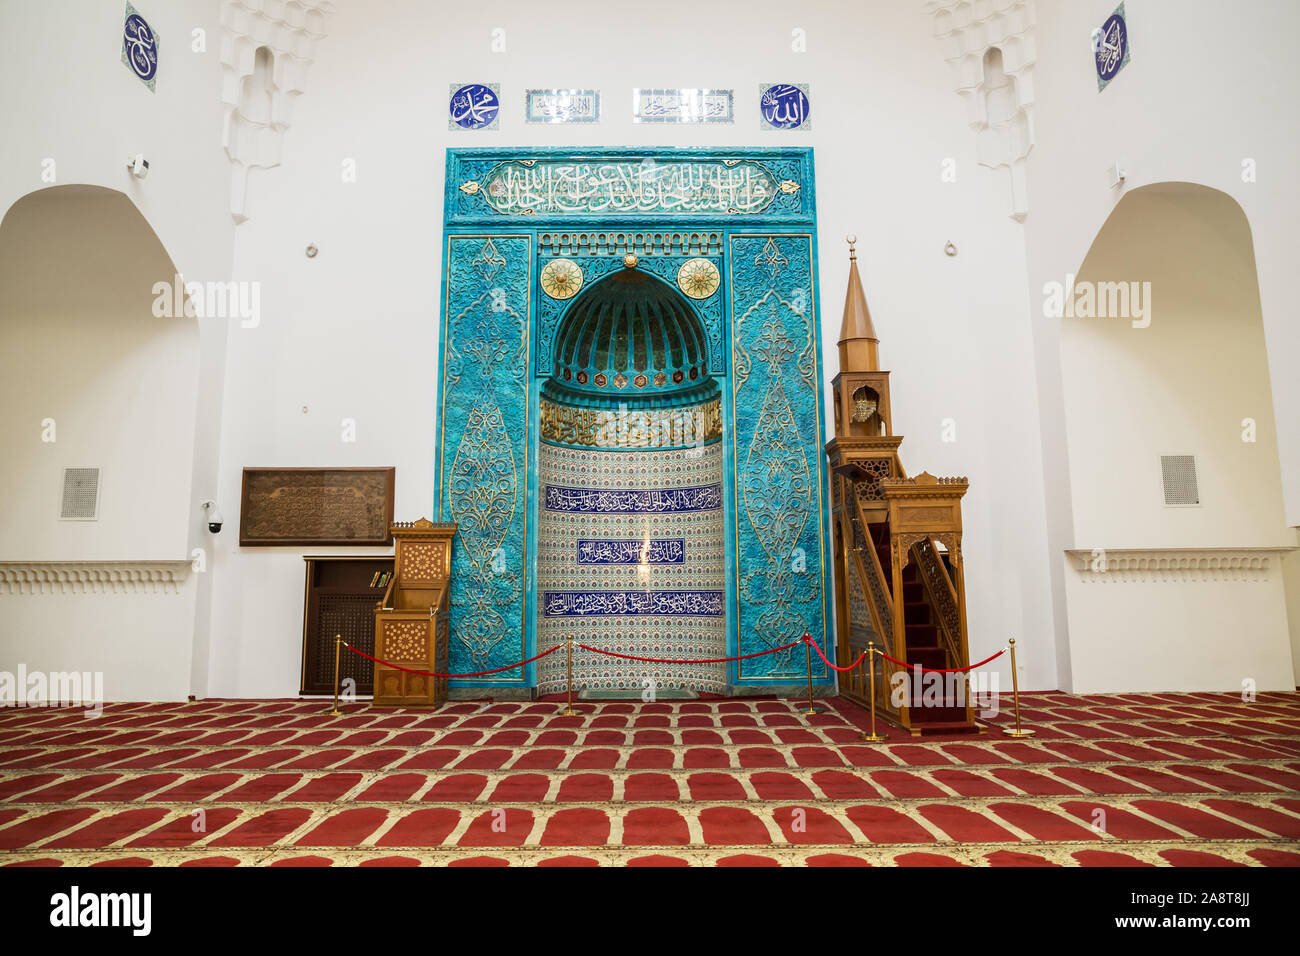 ST. PETERSBURG, RUSSIA - OCTOBER 26, 2019: interior of the cathedral mosque in Saint Petersburg, mihrab and minbar Stock Photo